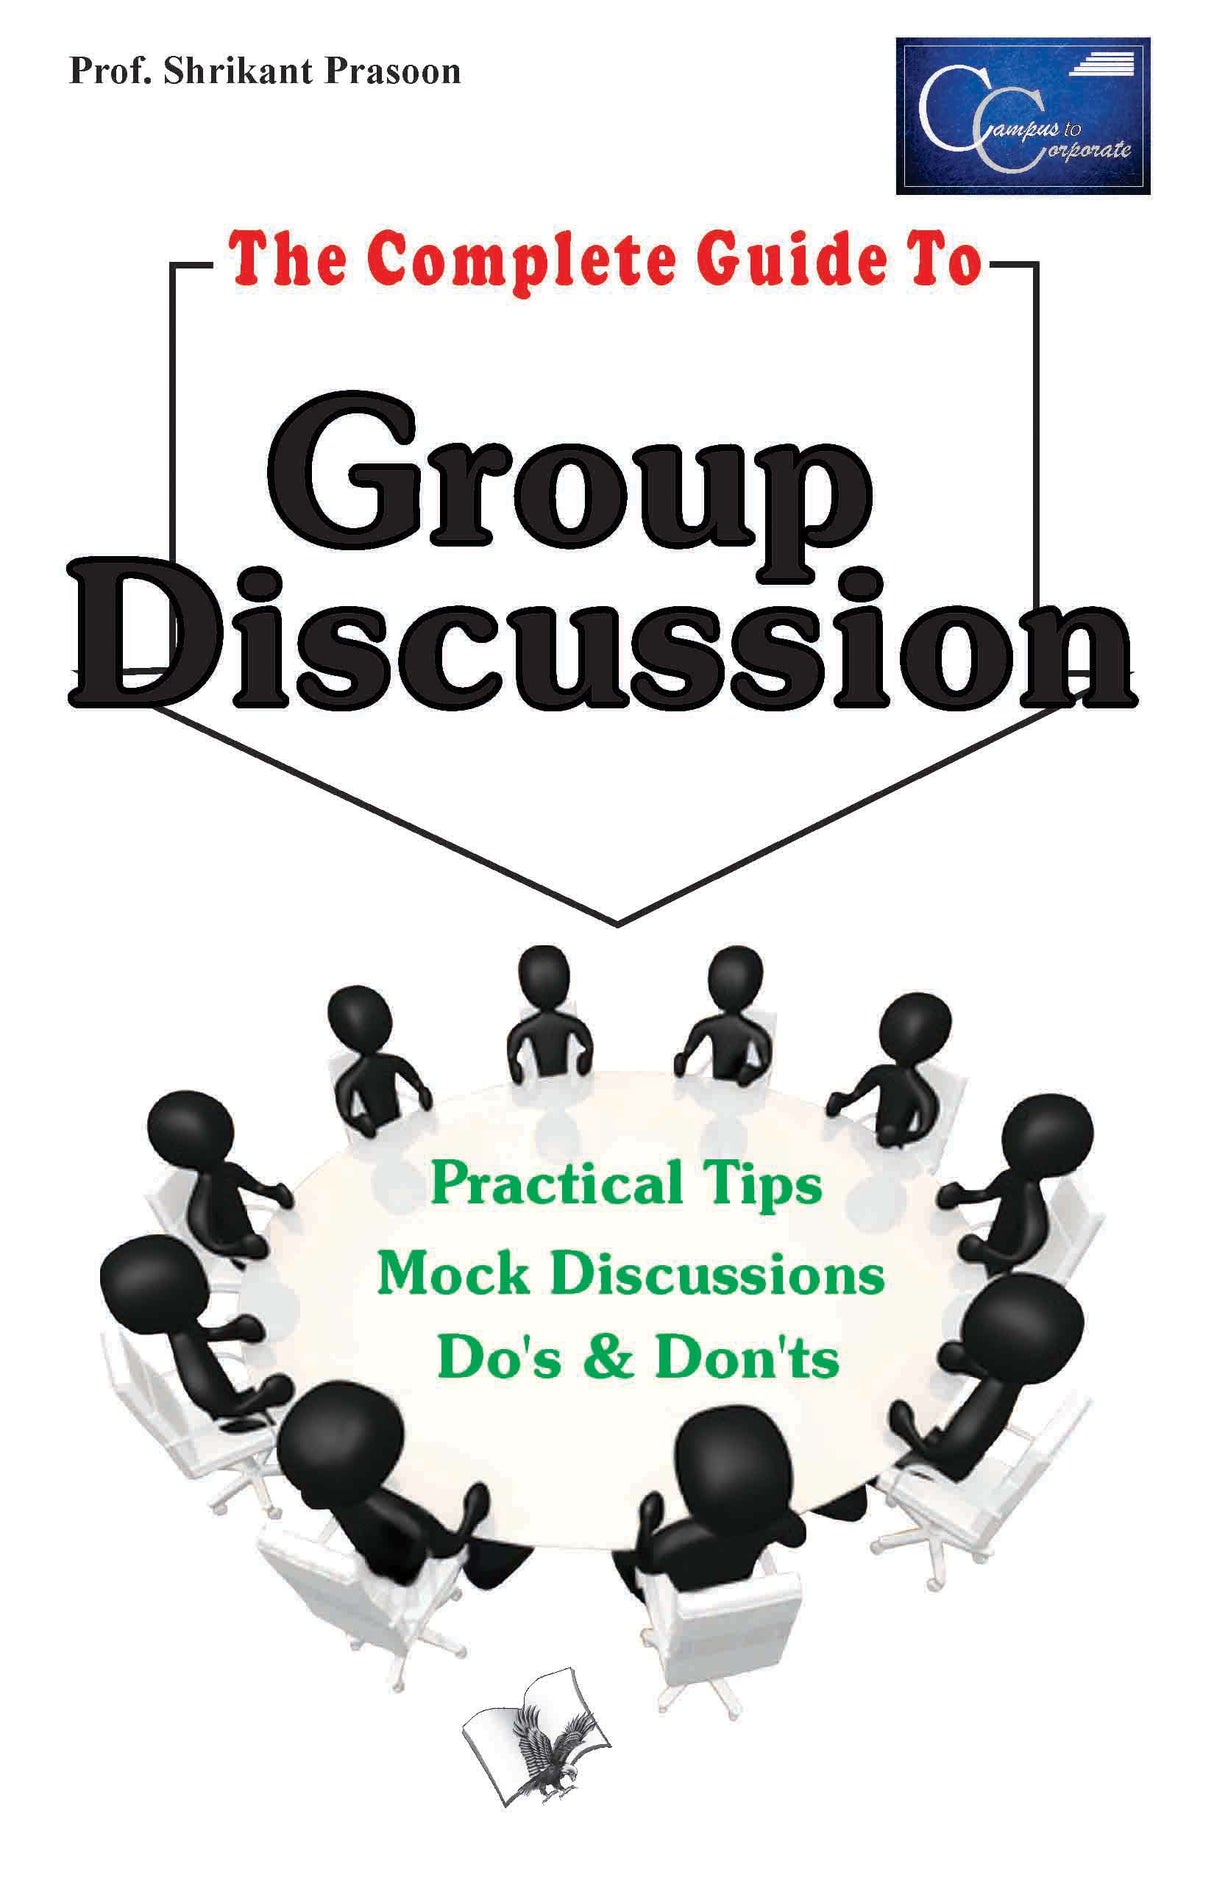 The Complete Guide To Group Discussion: Tips to take leadership position during group discussion